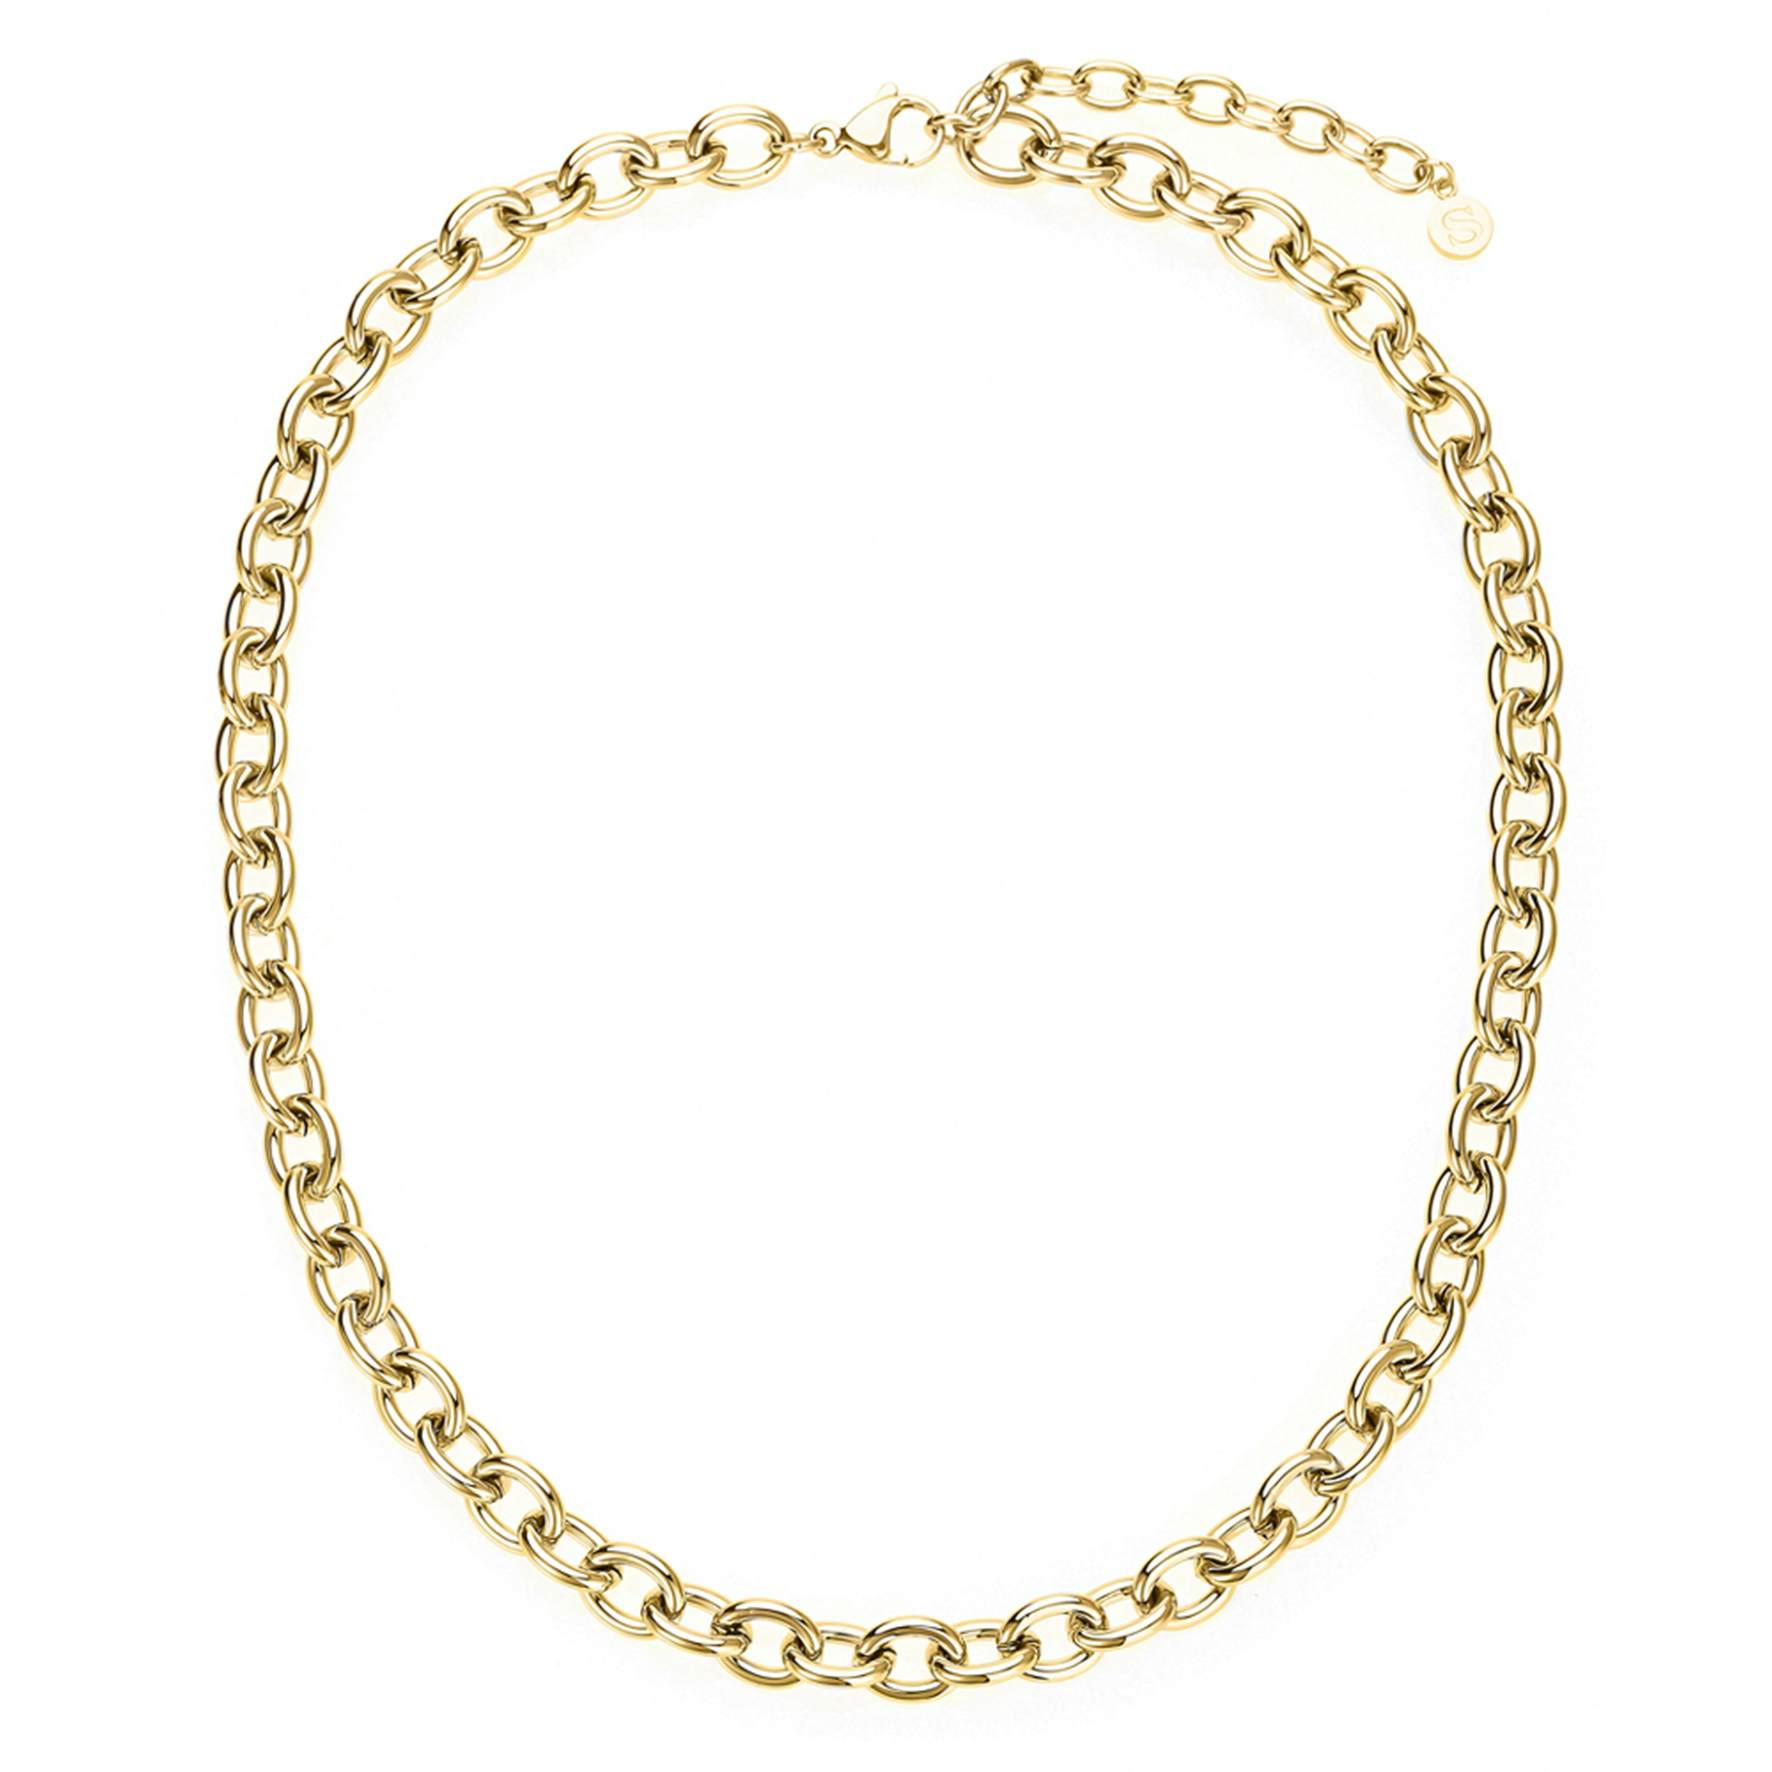 Clara Necklace from Sistie 2nd in Goldplated Stainless steel